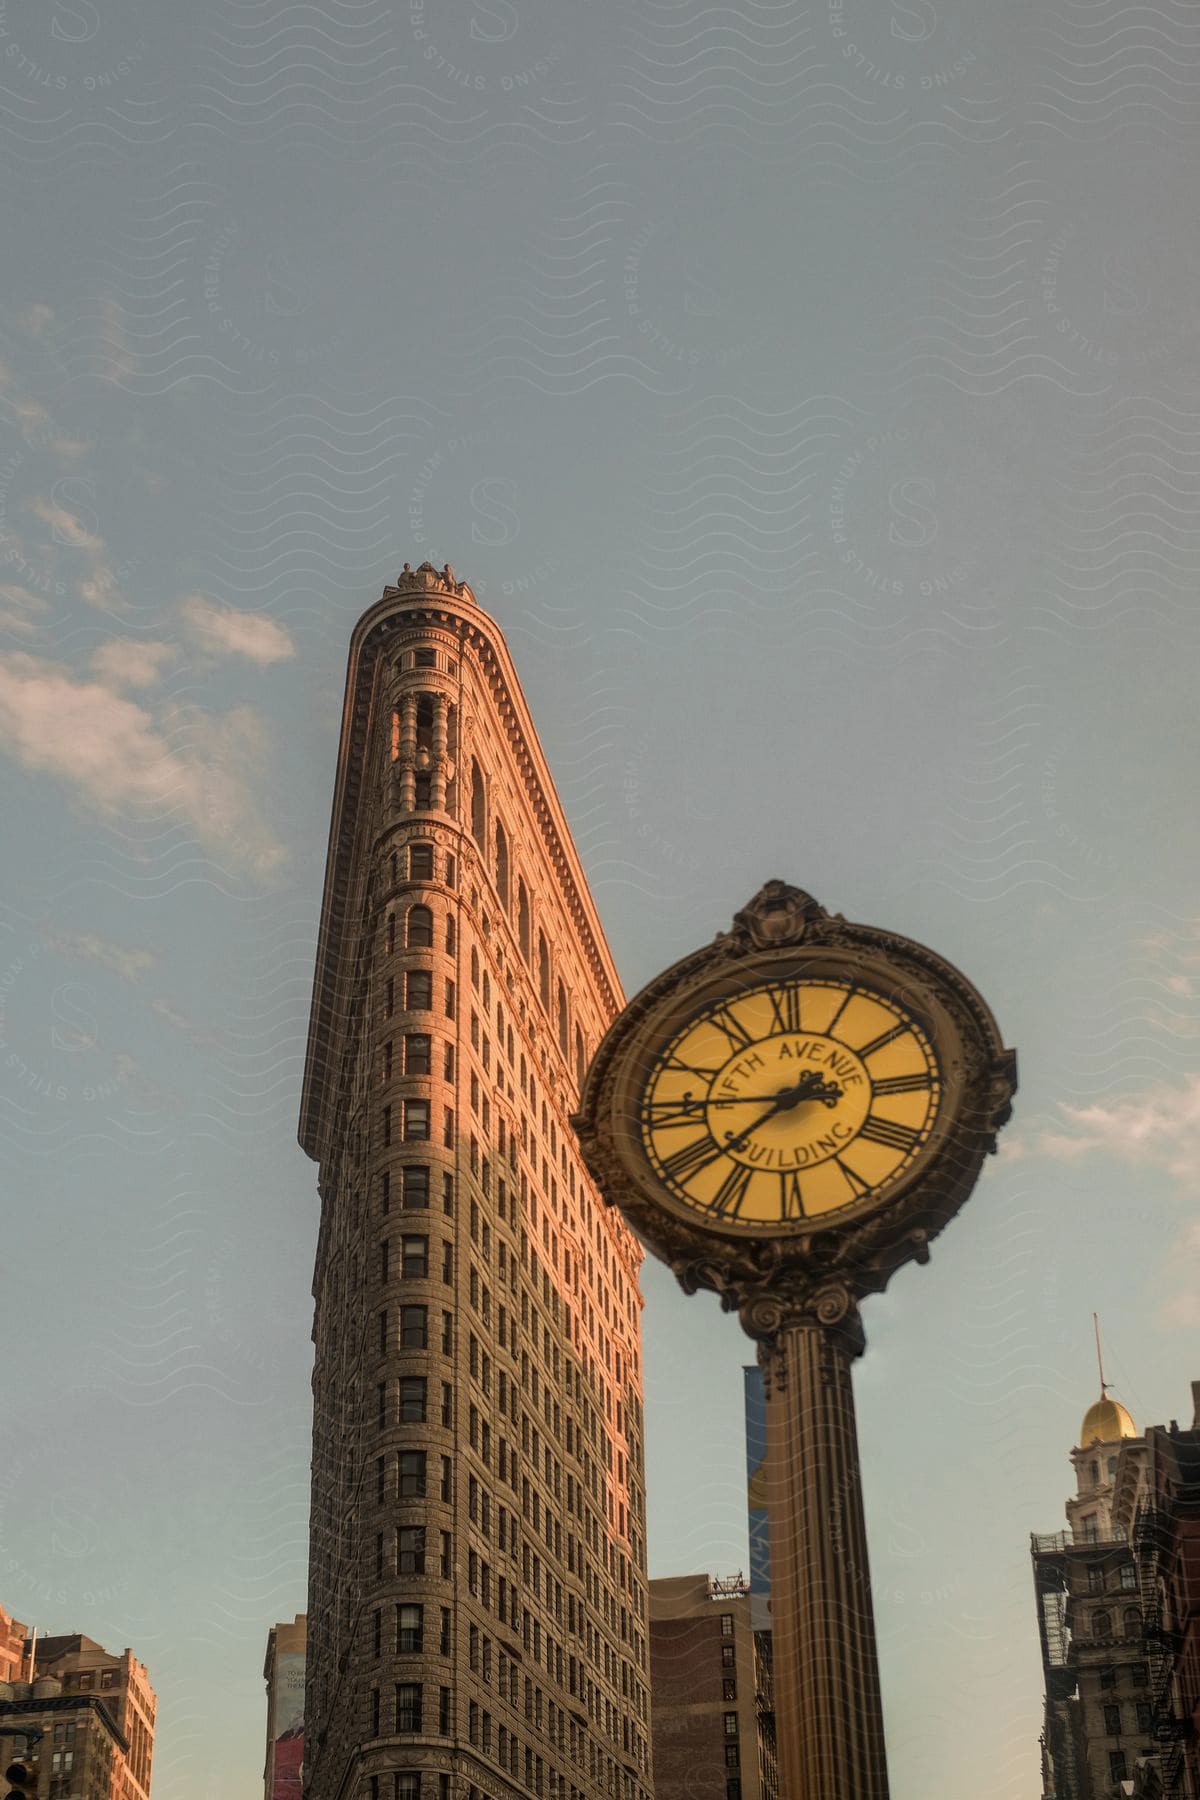 A clock sits on the street in front of a tall angled building